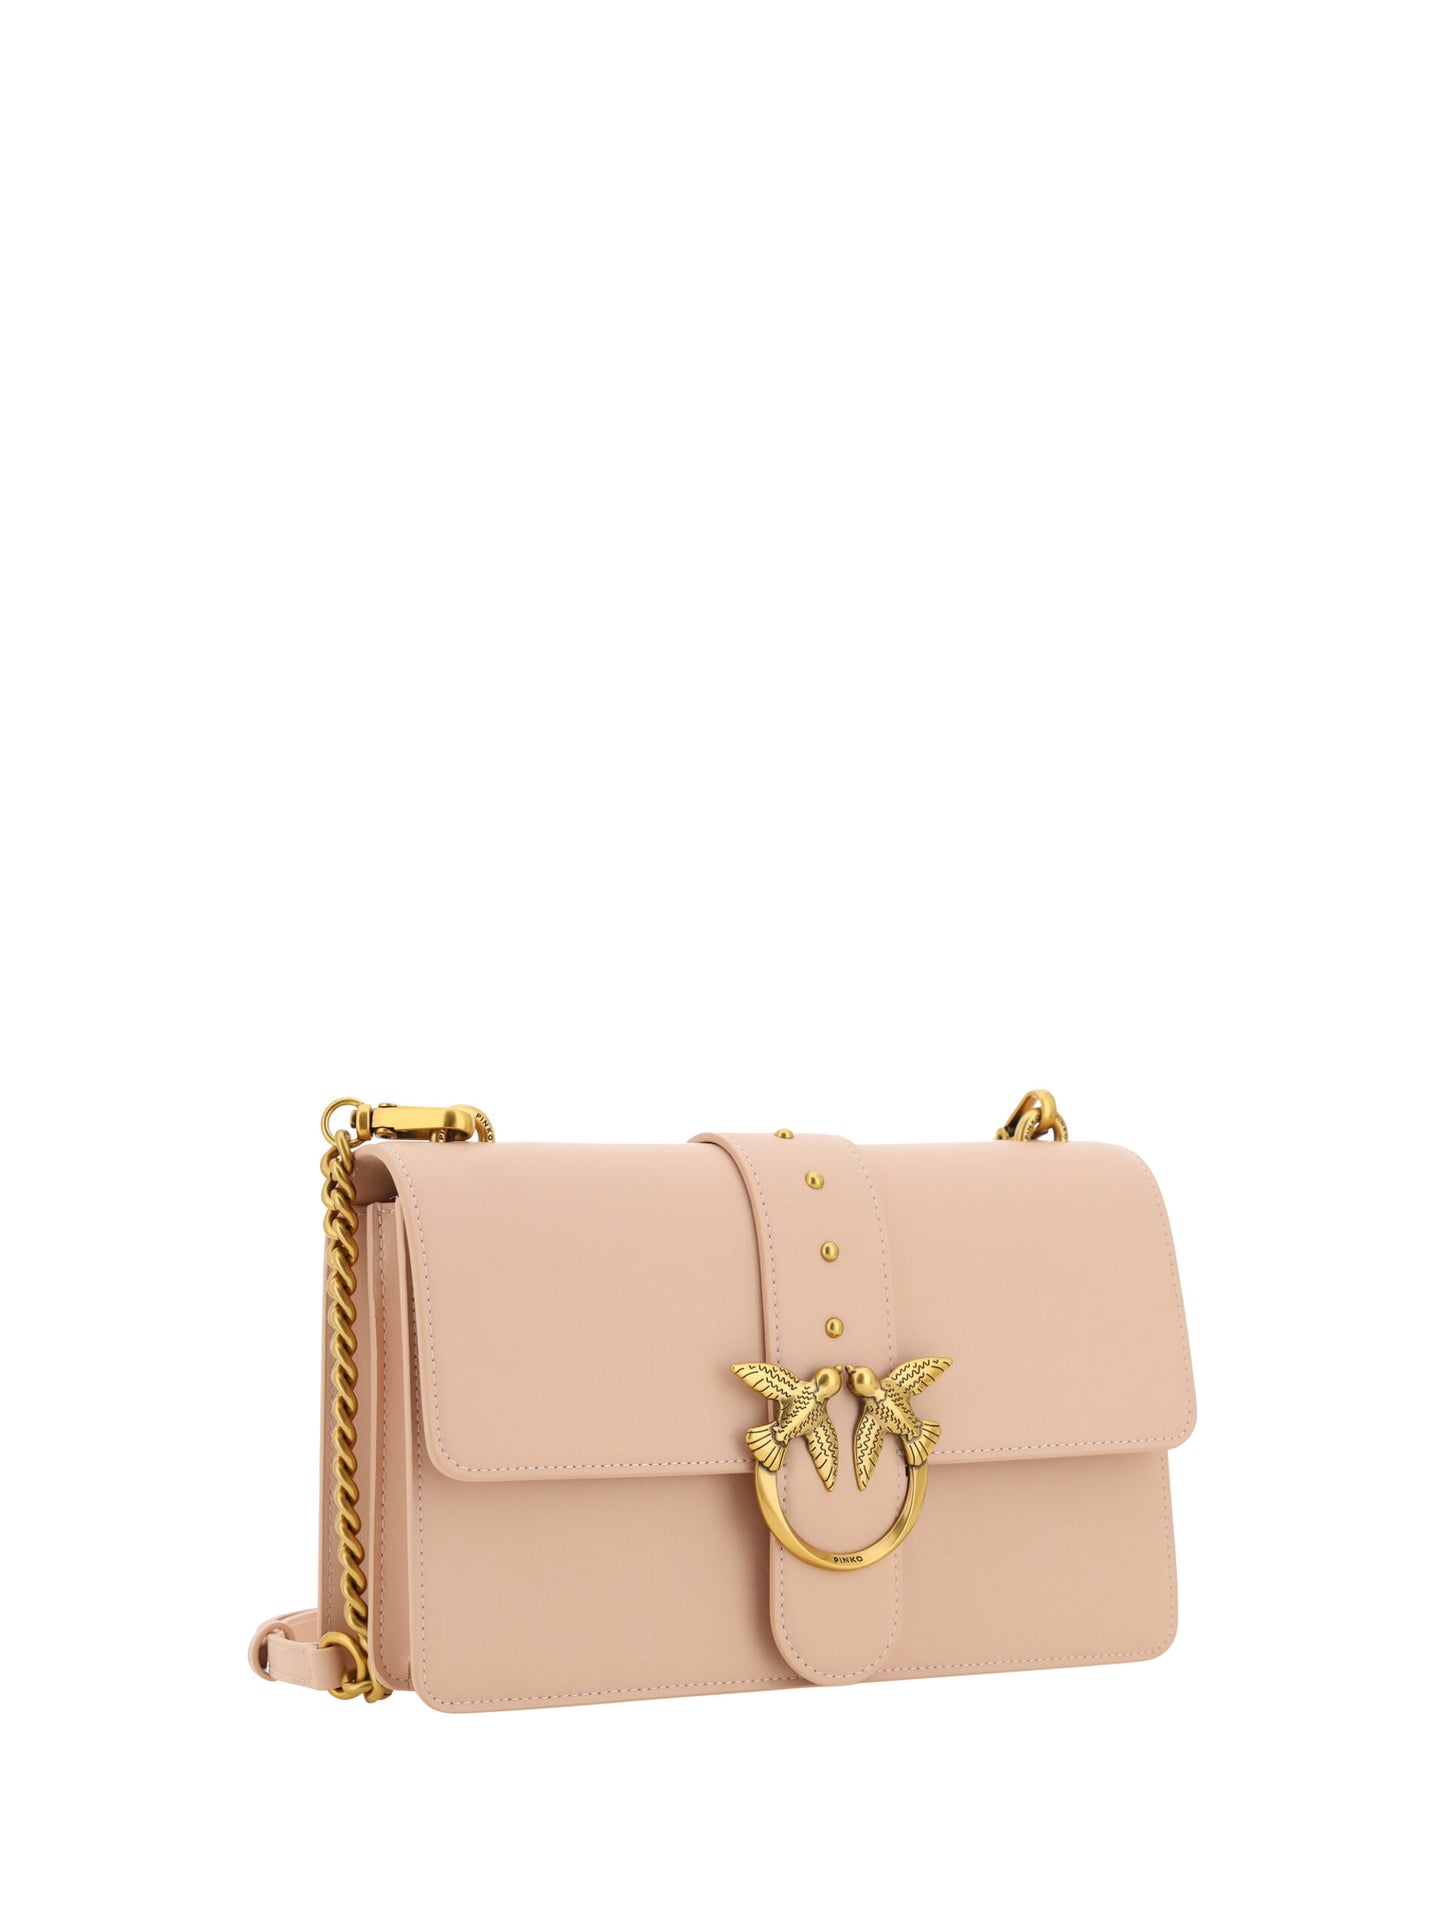 PINKO Pink Calf Leather Love One Classic Shoulder Bag